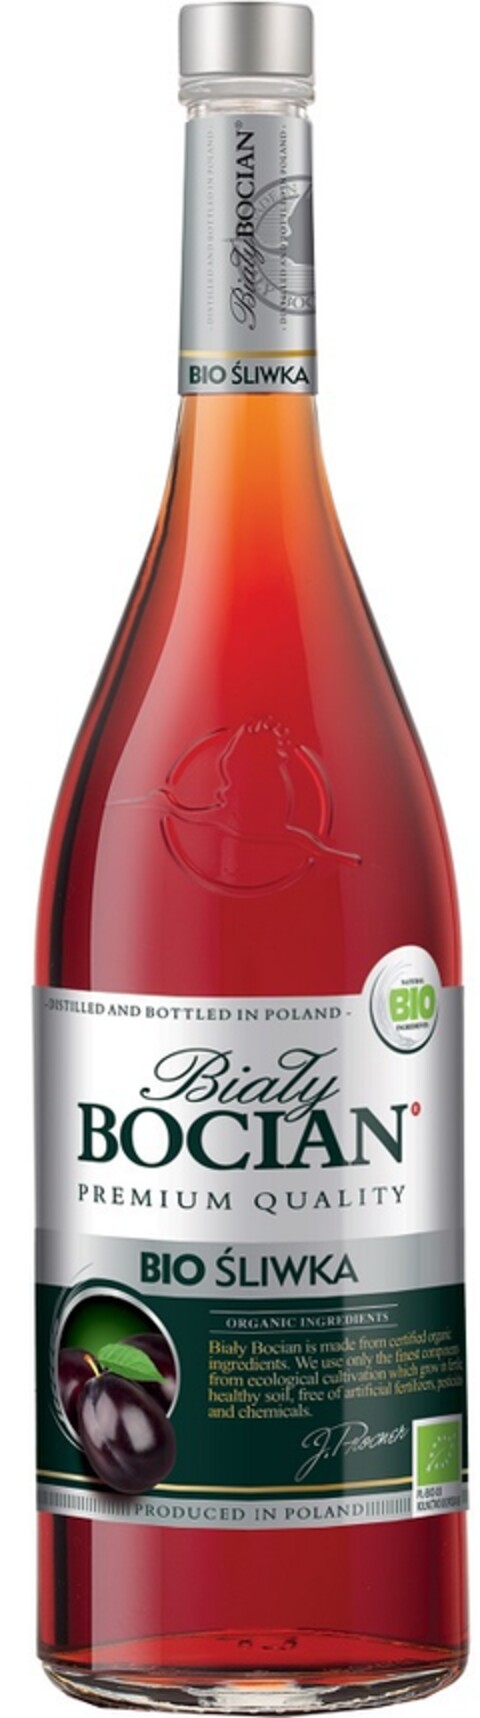 Biały BOCIAN BIO ŚLIWKA – DISTILLED AND BOTTLED IN POLAND – PREMIUM QUALITY – ORGANIC INGREDIENTS Biały Bocian is made from certified organic ingredients. We use only the finest components from ecological cultivation which grow in healthy soil, free of artificial fertilisers, pesticides and chemicals. PRODUCED IN POLAND Logo (EUIPO, 31.05.2019)